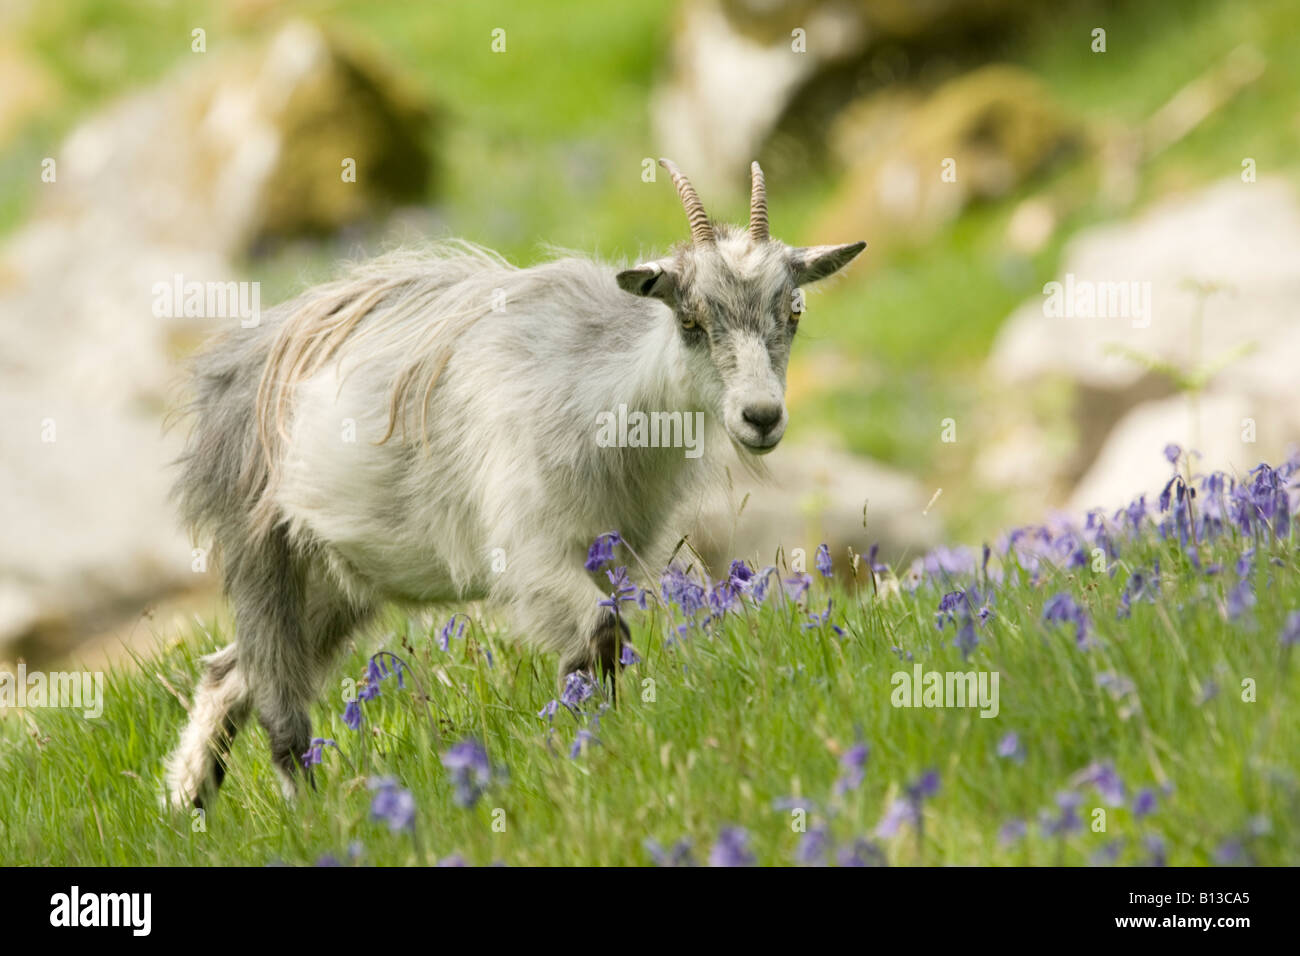 Wild feral goat nanny goat amougest the spring bluebells in the Wild Goat Park Galloway Forest Park Scotland UK Stock Photo